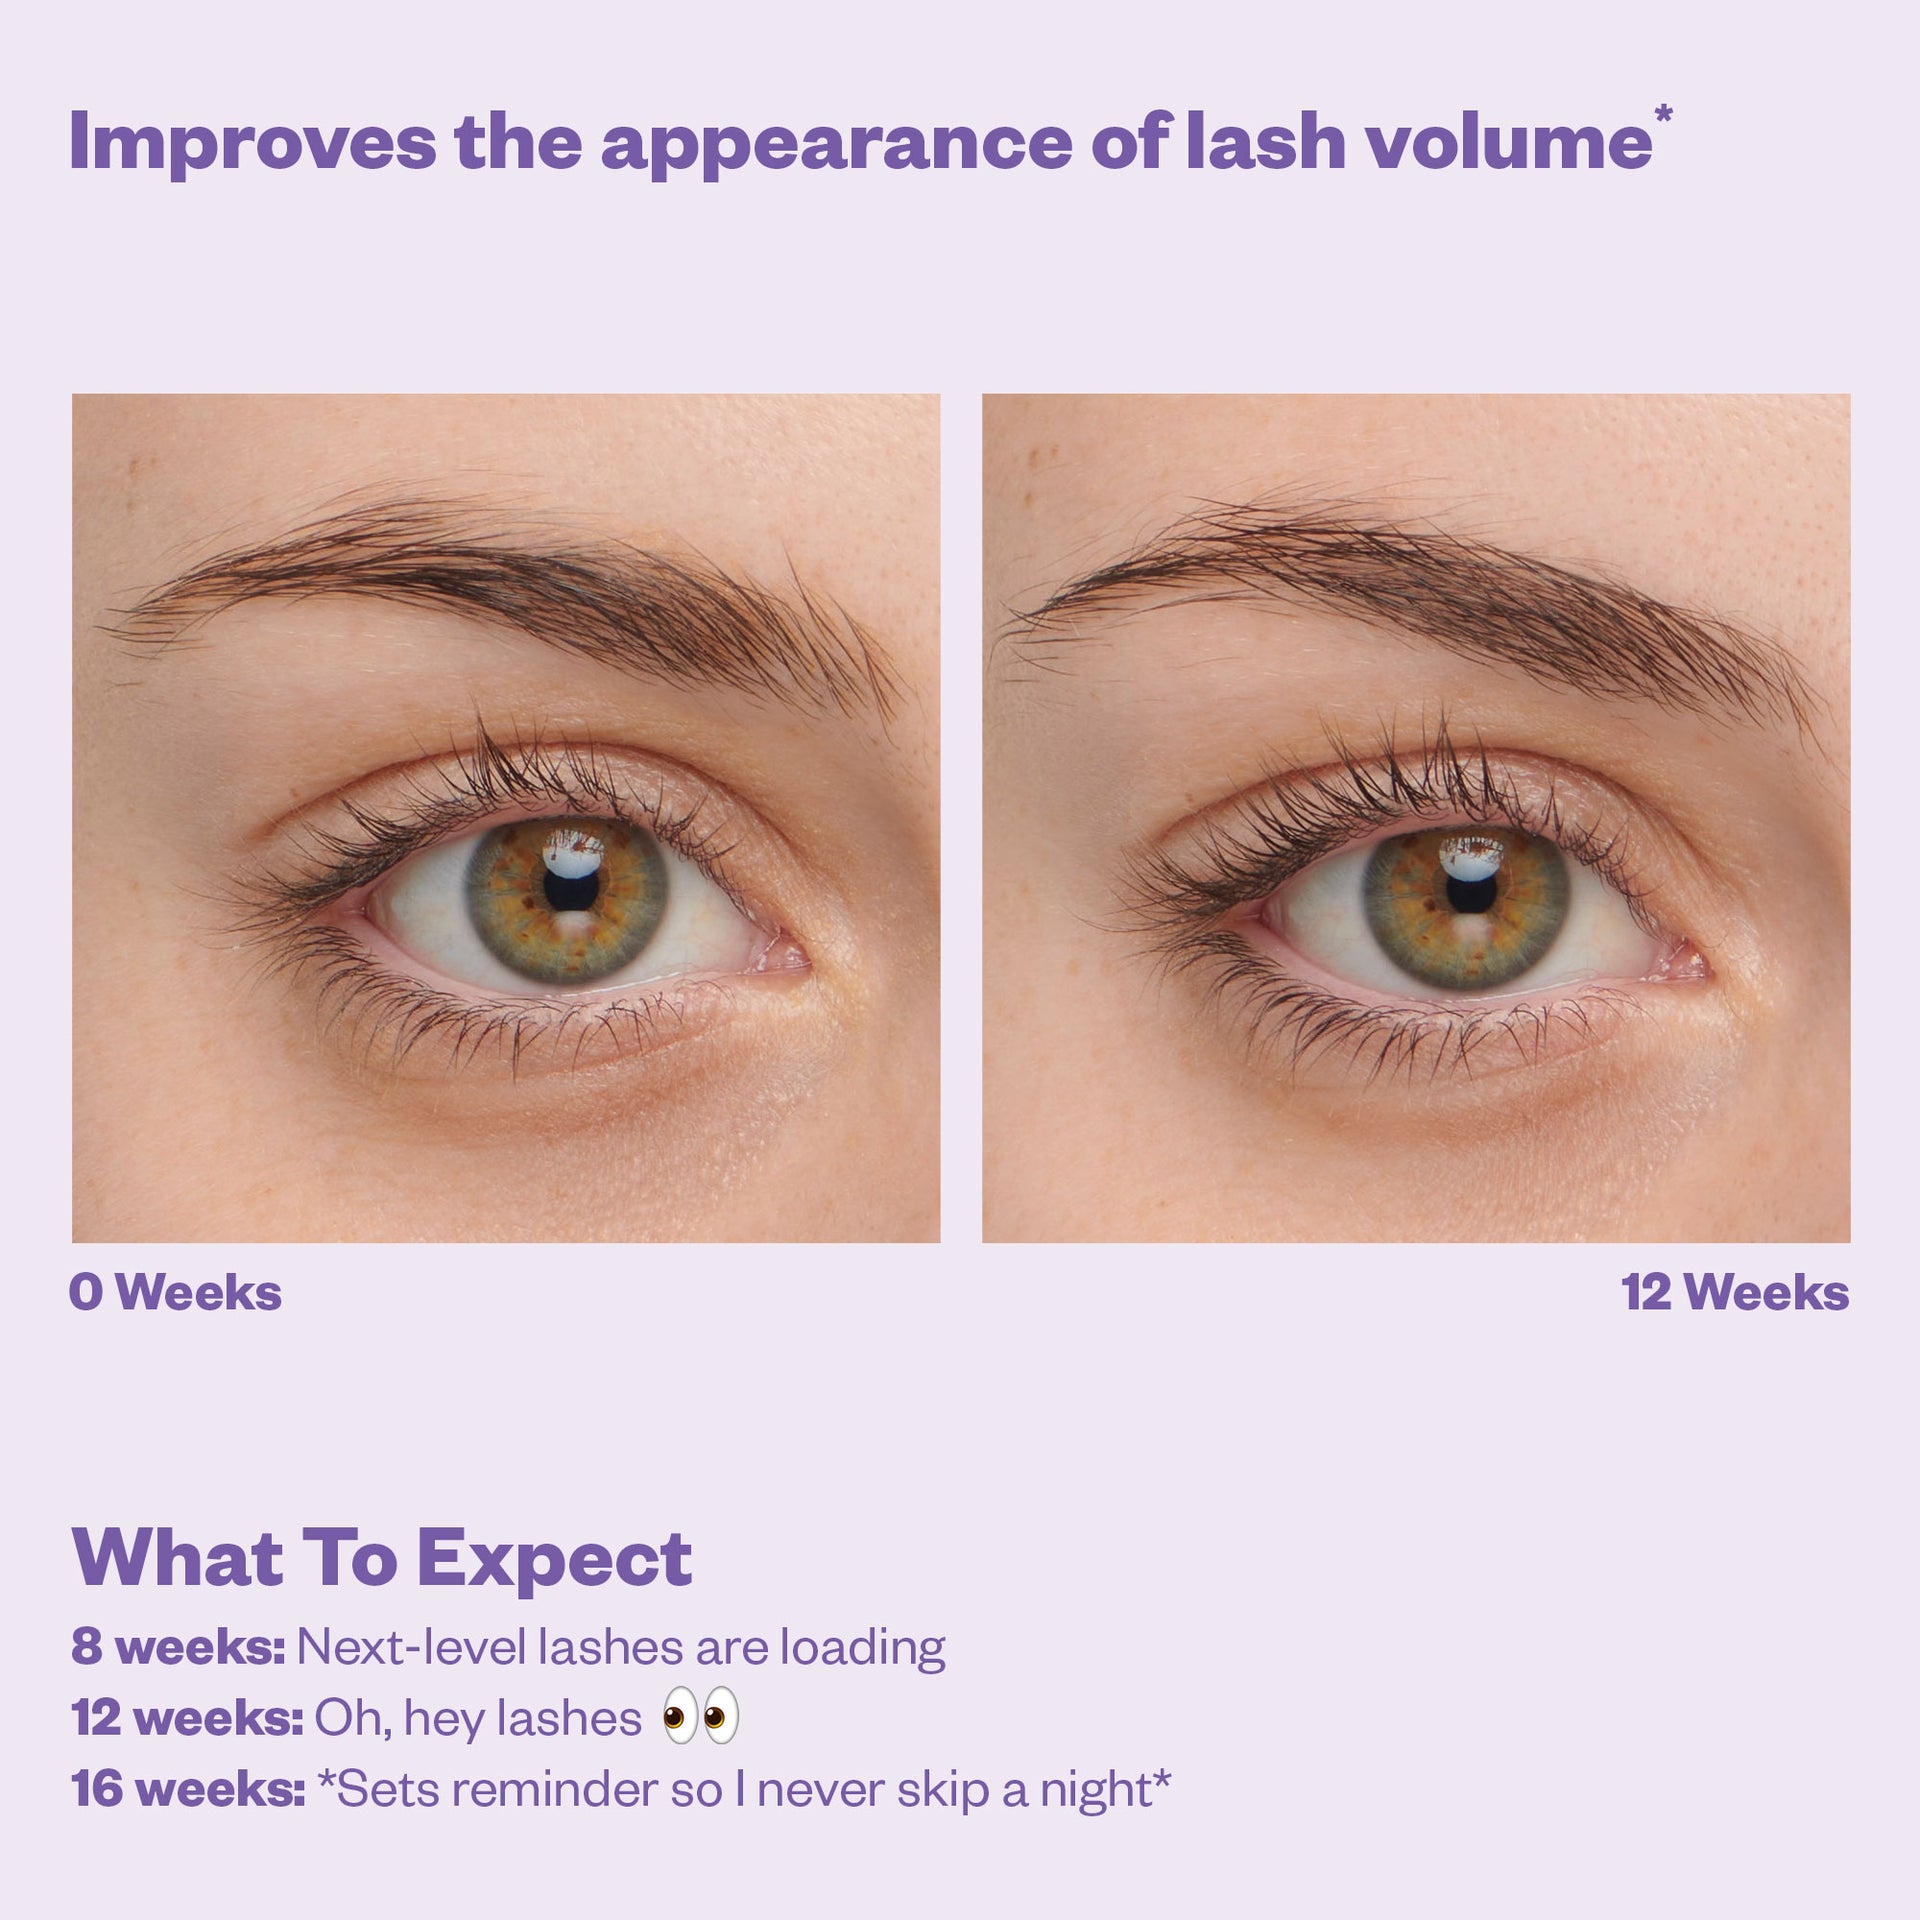 Improves the appearance of lash volume in 12 weeks